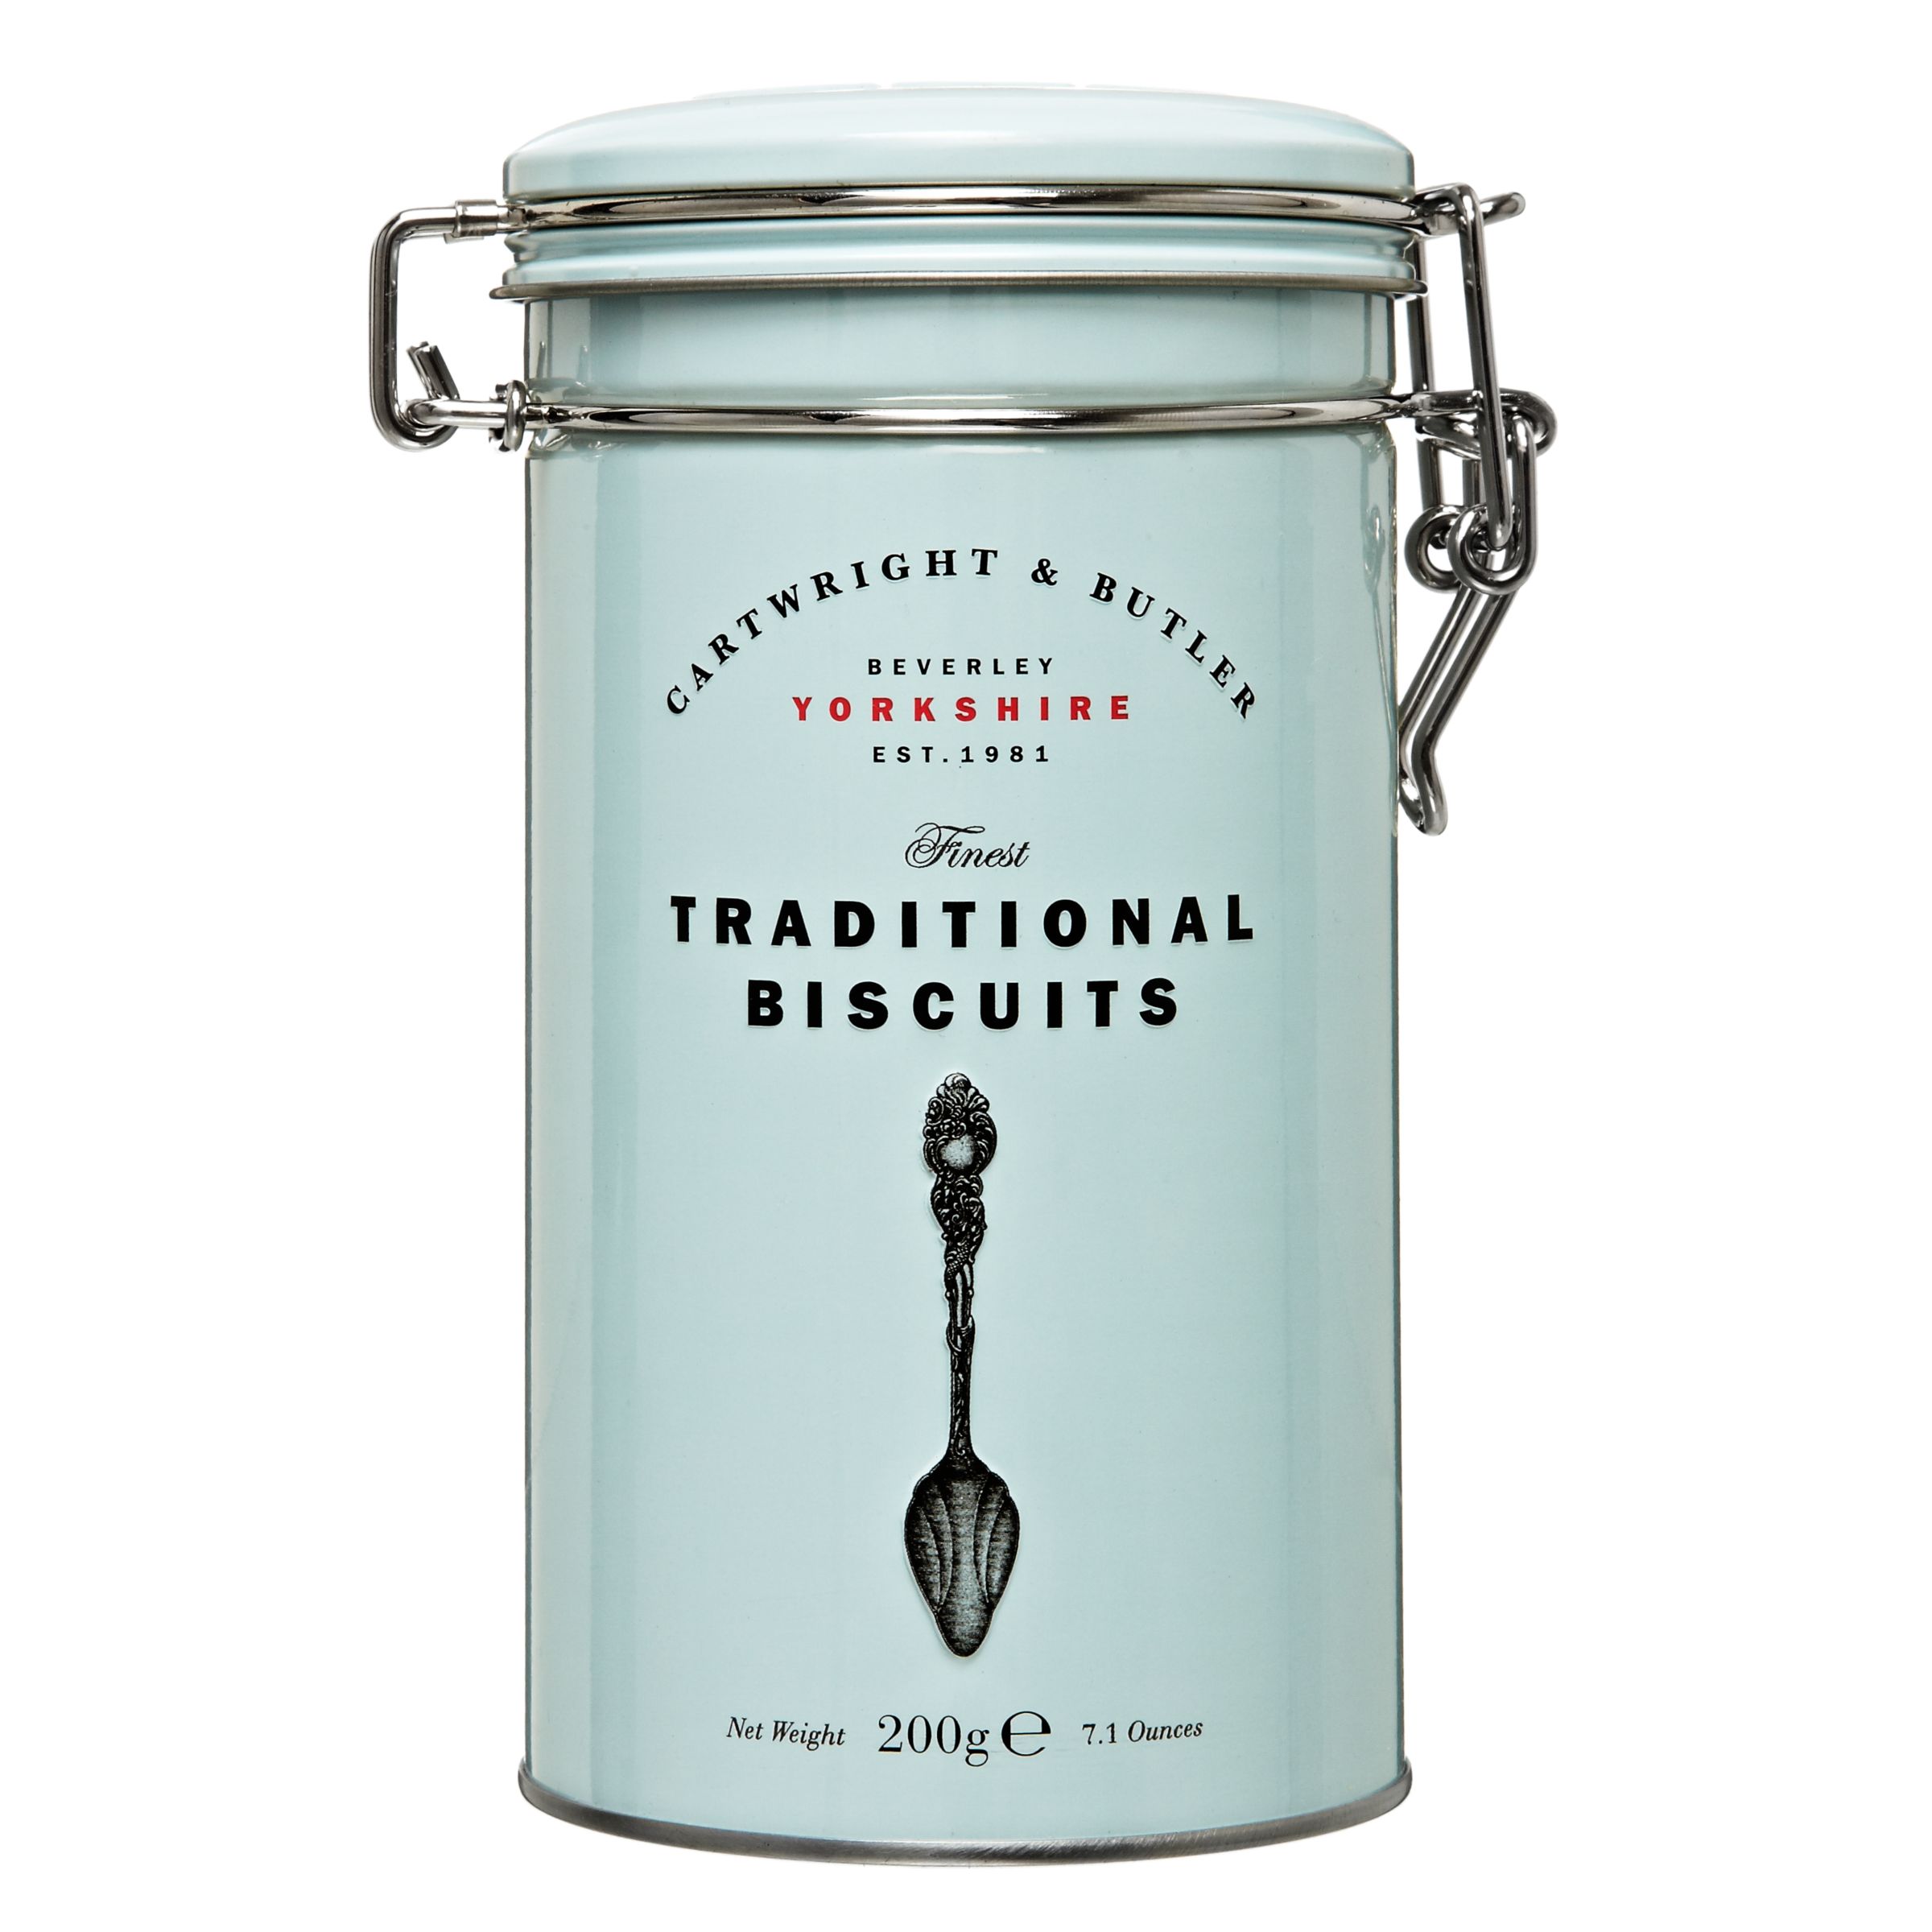 Cartwright Butler Strawberry And White Chocolate Biscuits Cannister 0g At John Lewis Partners